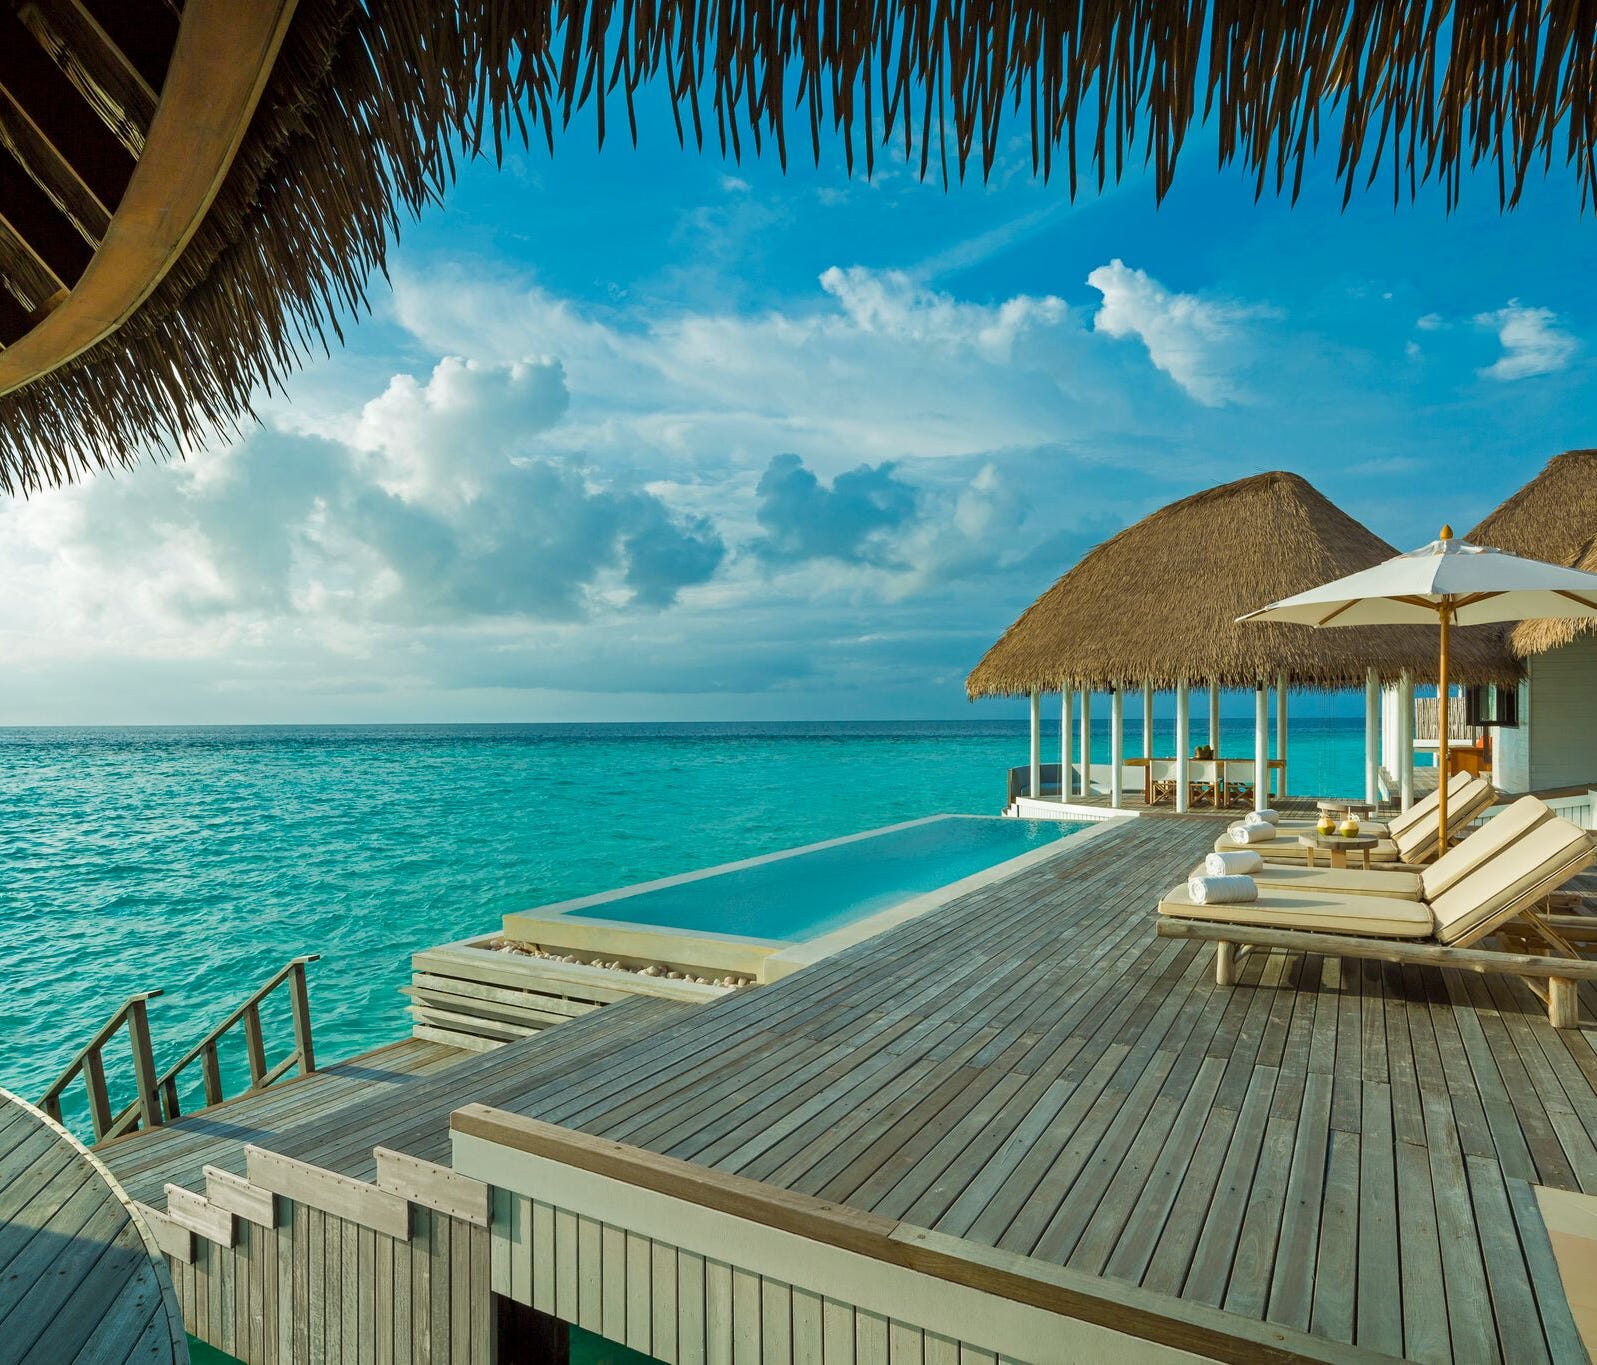 Como Maalifushi is situated on the pristine Thaa Atoll in the Maldives, known for its diving and surf breaks. The property's two-bedroom overwater Como villas, priced at $1,400 per night including breakfast, sit above the turquoise lagoon with their 